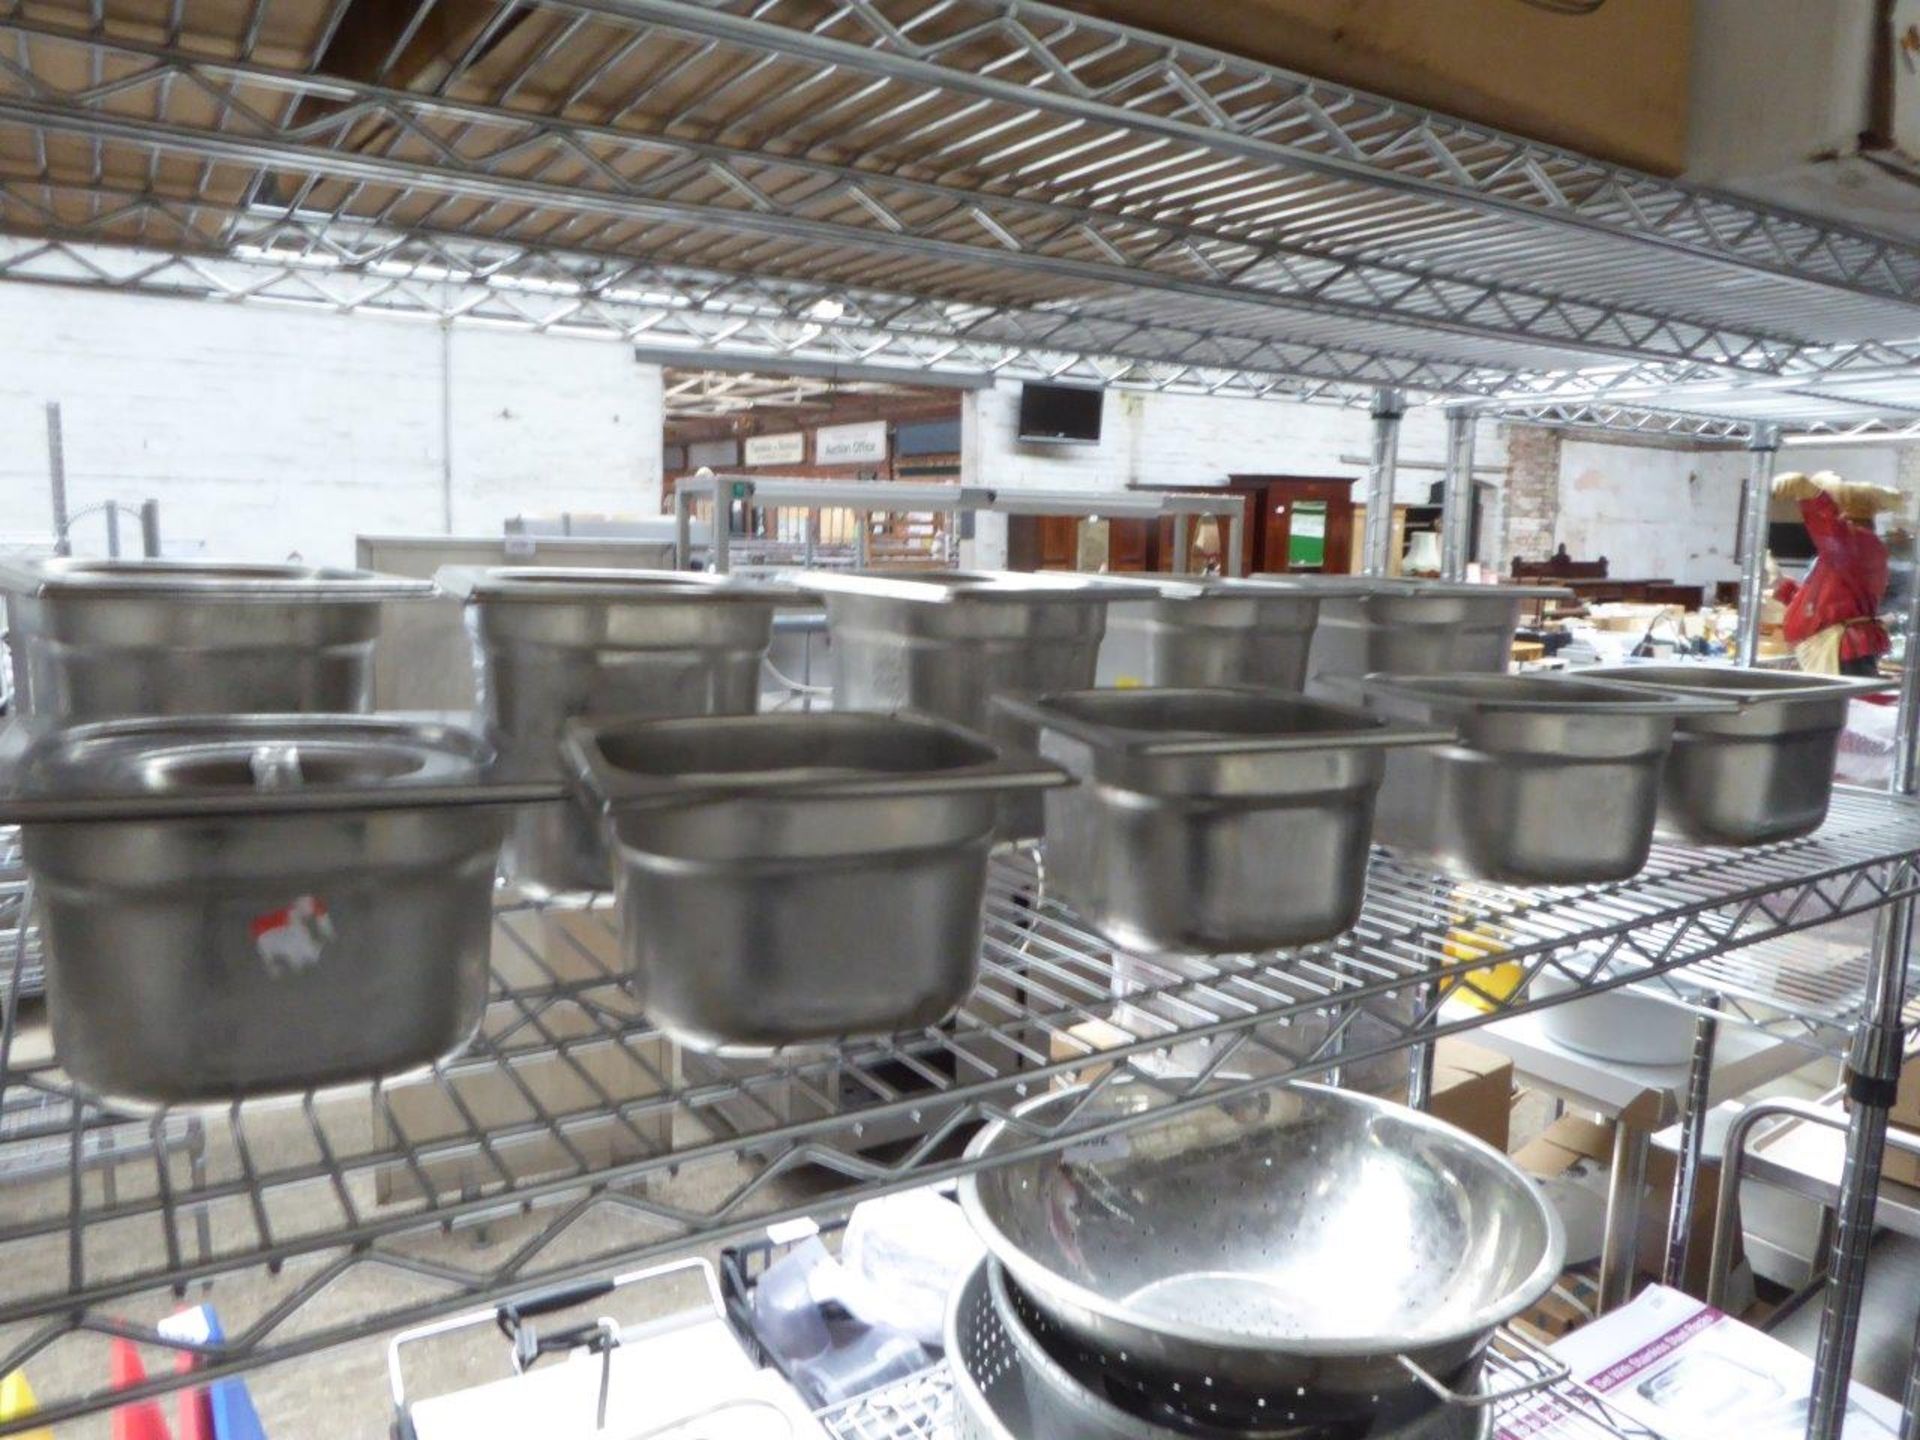 16 stainless steel gastronorms pots.